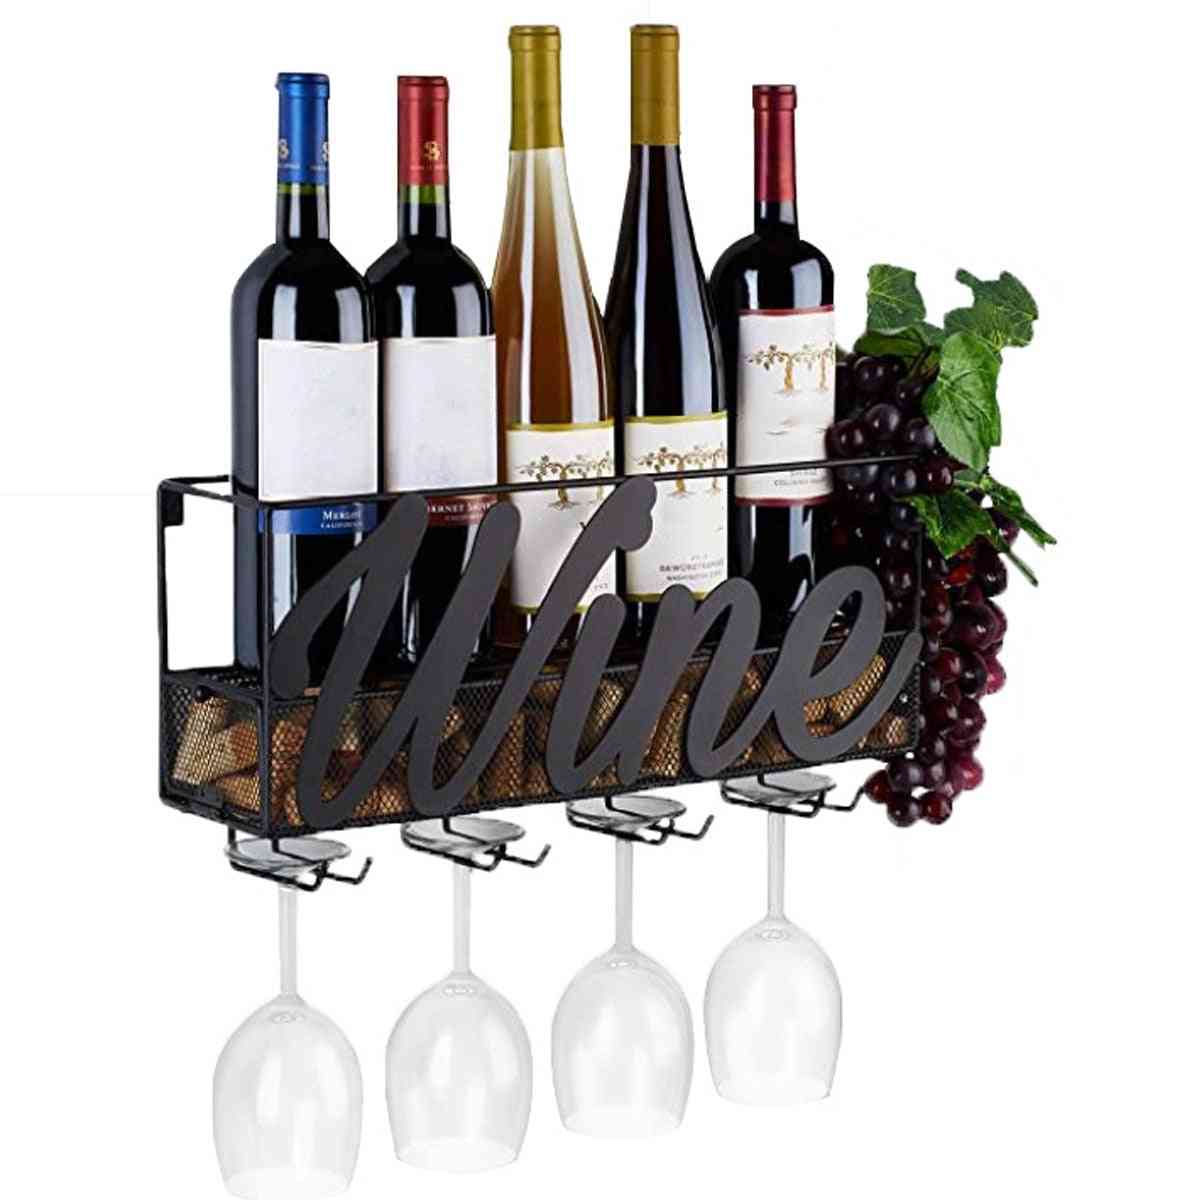 Rack Bottle Shelf With 4 Built-in Wine Glass Holders And Extra Cork Tray